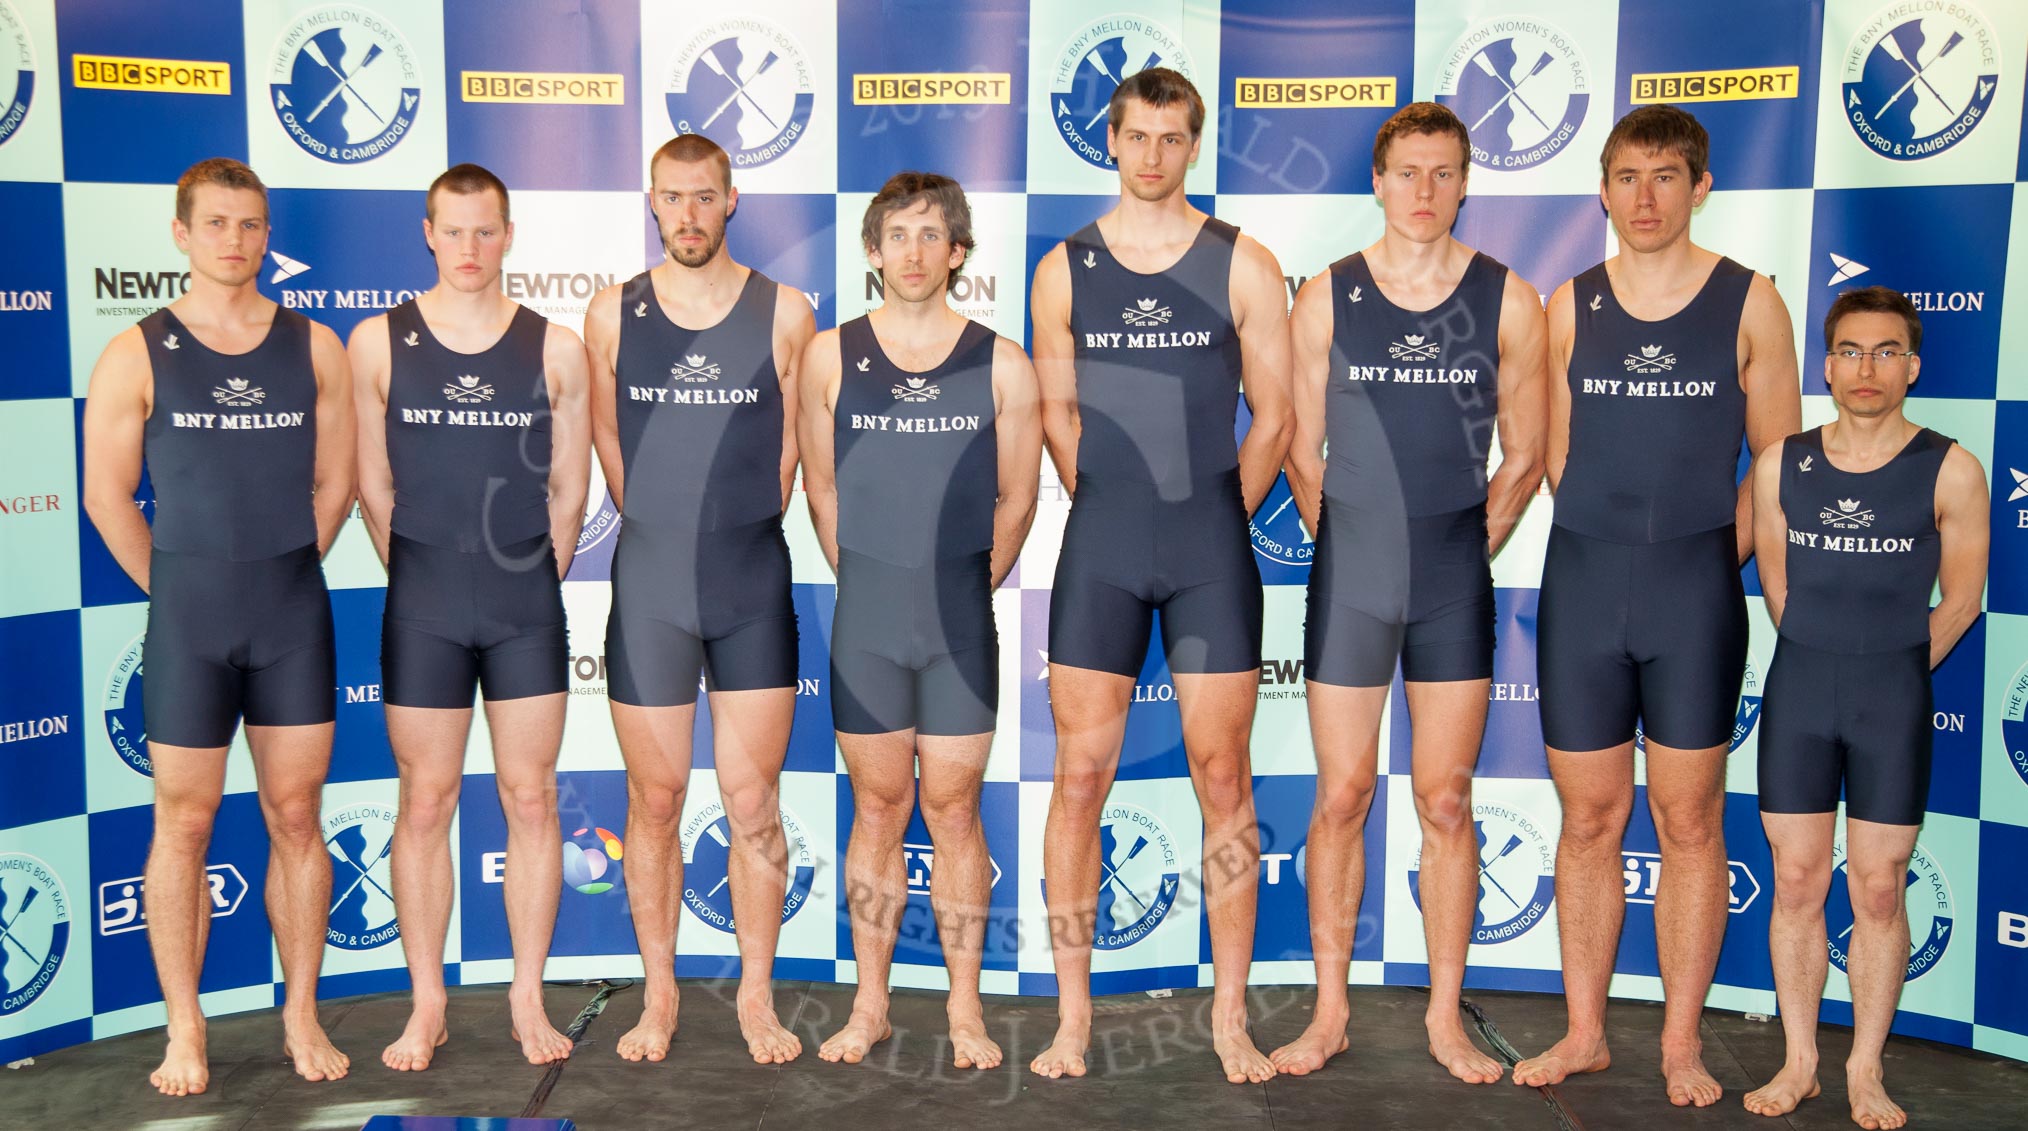 The Boat Race season 2013 - Crew Announcement and Weigh In: The 2013 Oxford Blue Boat crew, from left (bow) to right (cox), without 7 seat Constantine Louloudis: Patrick Close, Geordie Macleod, Alexander Davidson, Samuel O'Connor, Paul Bennet, Karl Hudspith, Malcolm Howard, and Oskar Zorilla..
BNY Mellon Centre,
London EC4V 4LA,

United Kingdom,
on 04 March 2013 at 10:45, image #88